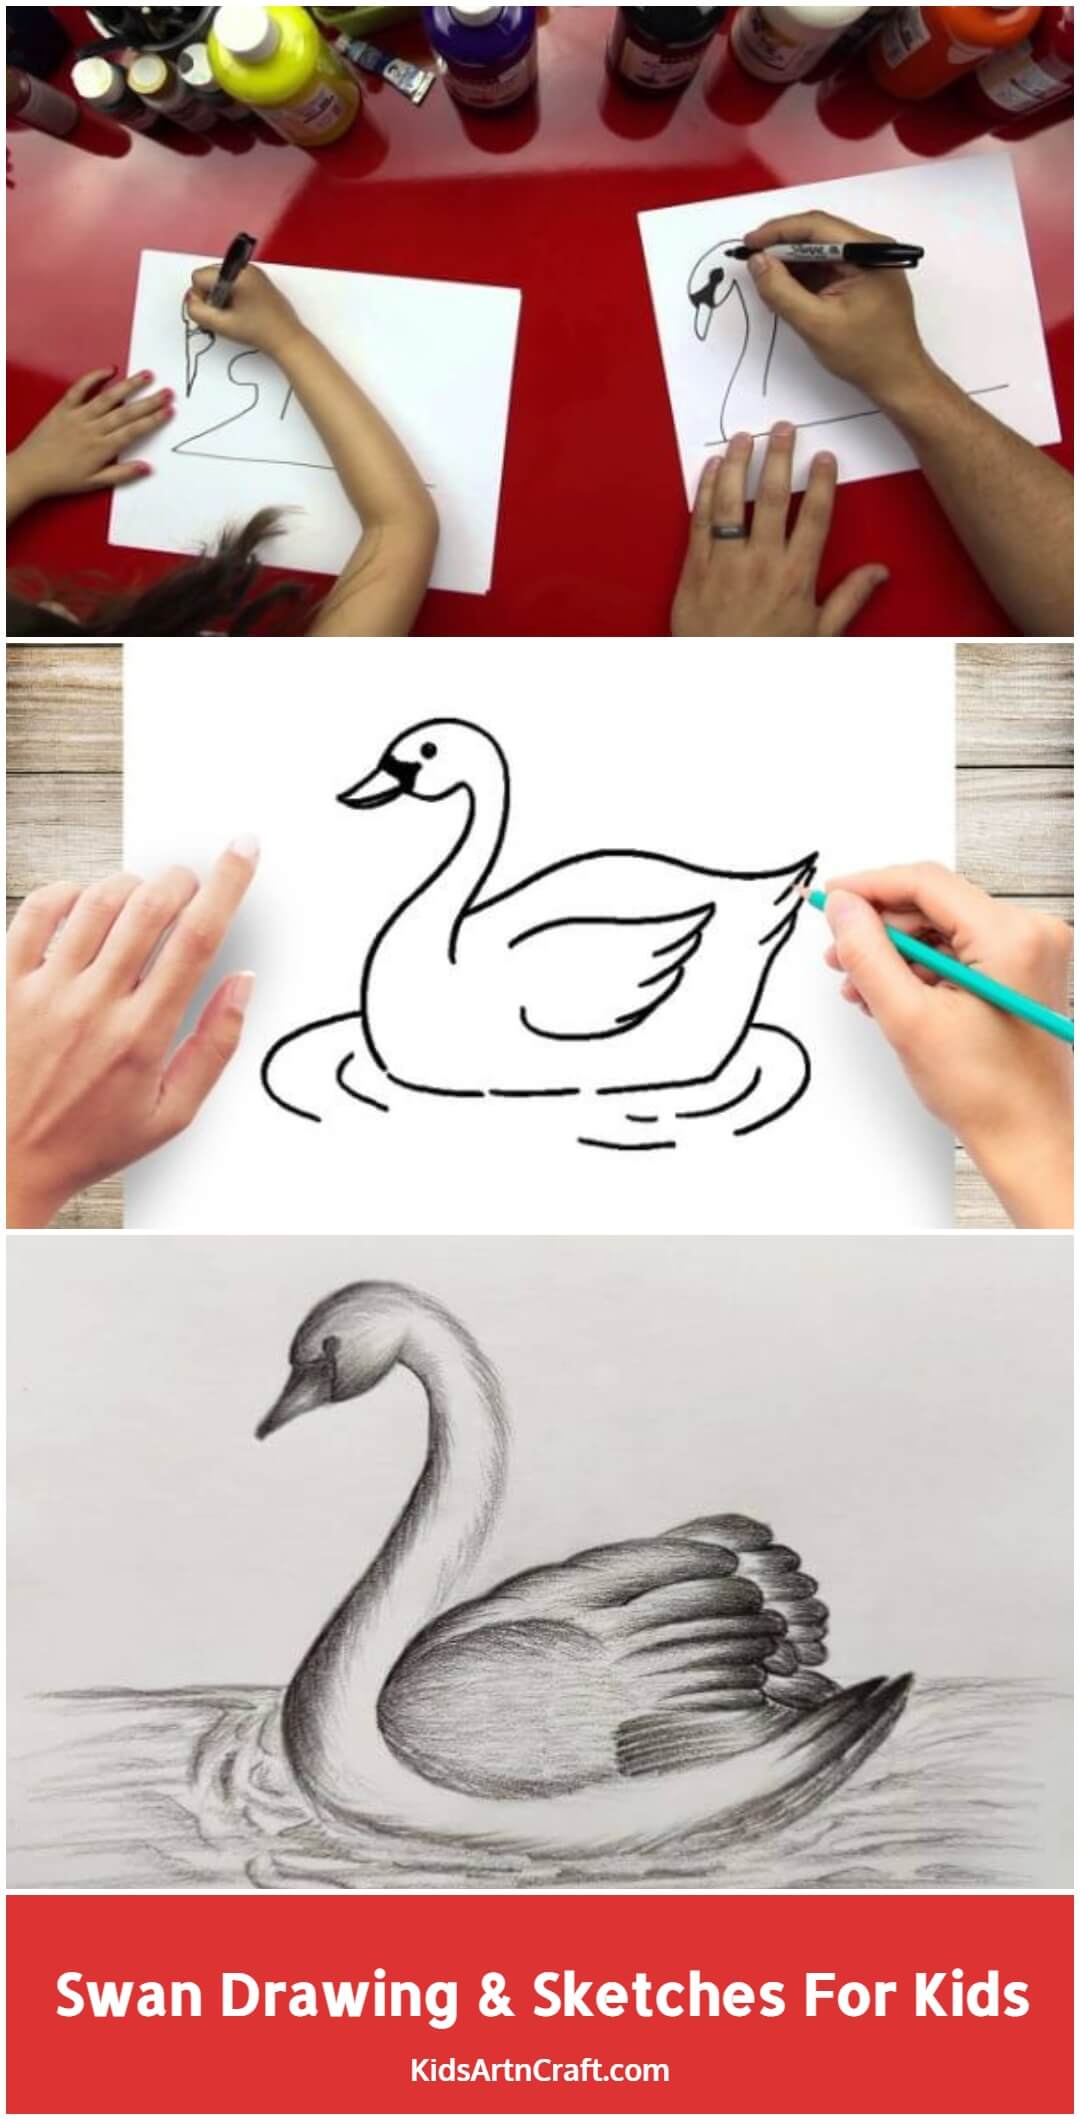 Swan Drawing & Sketches For Kids